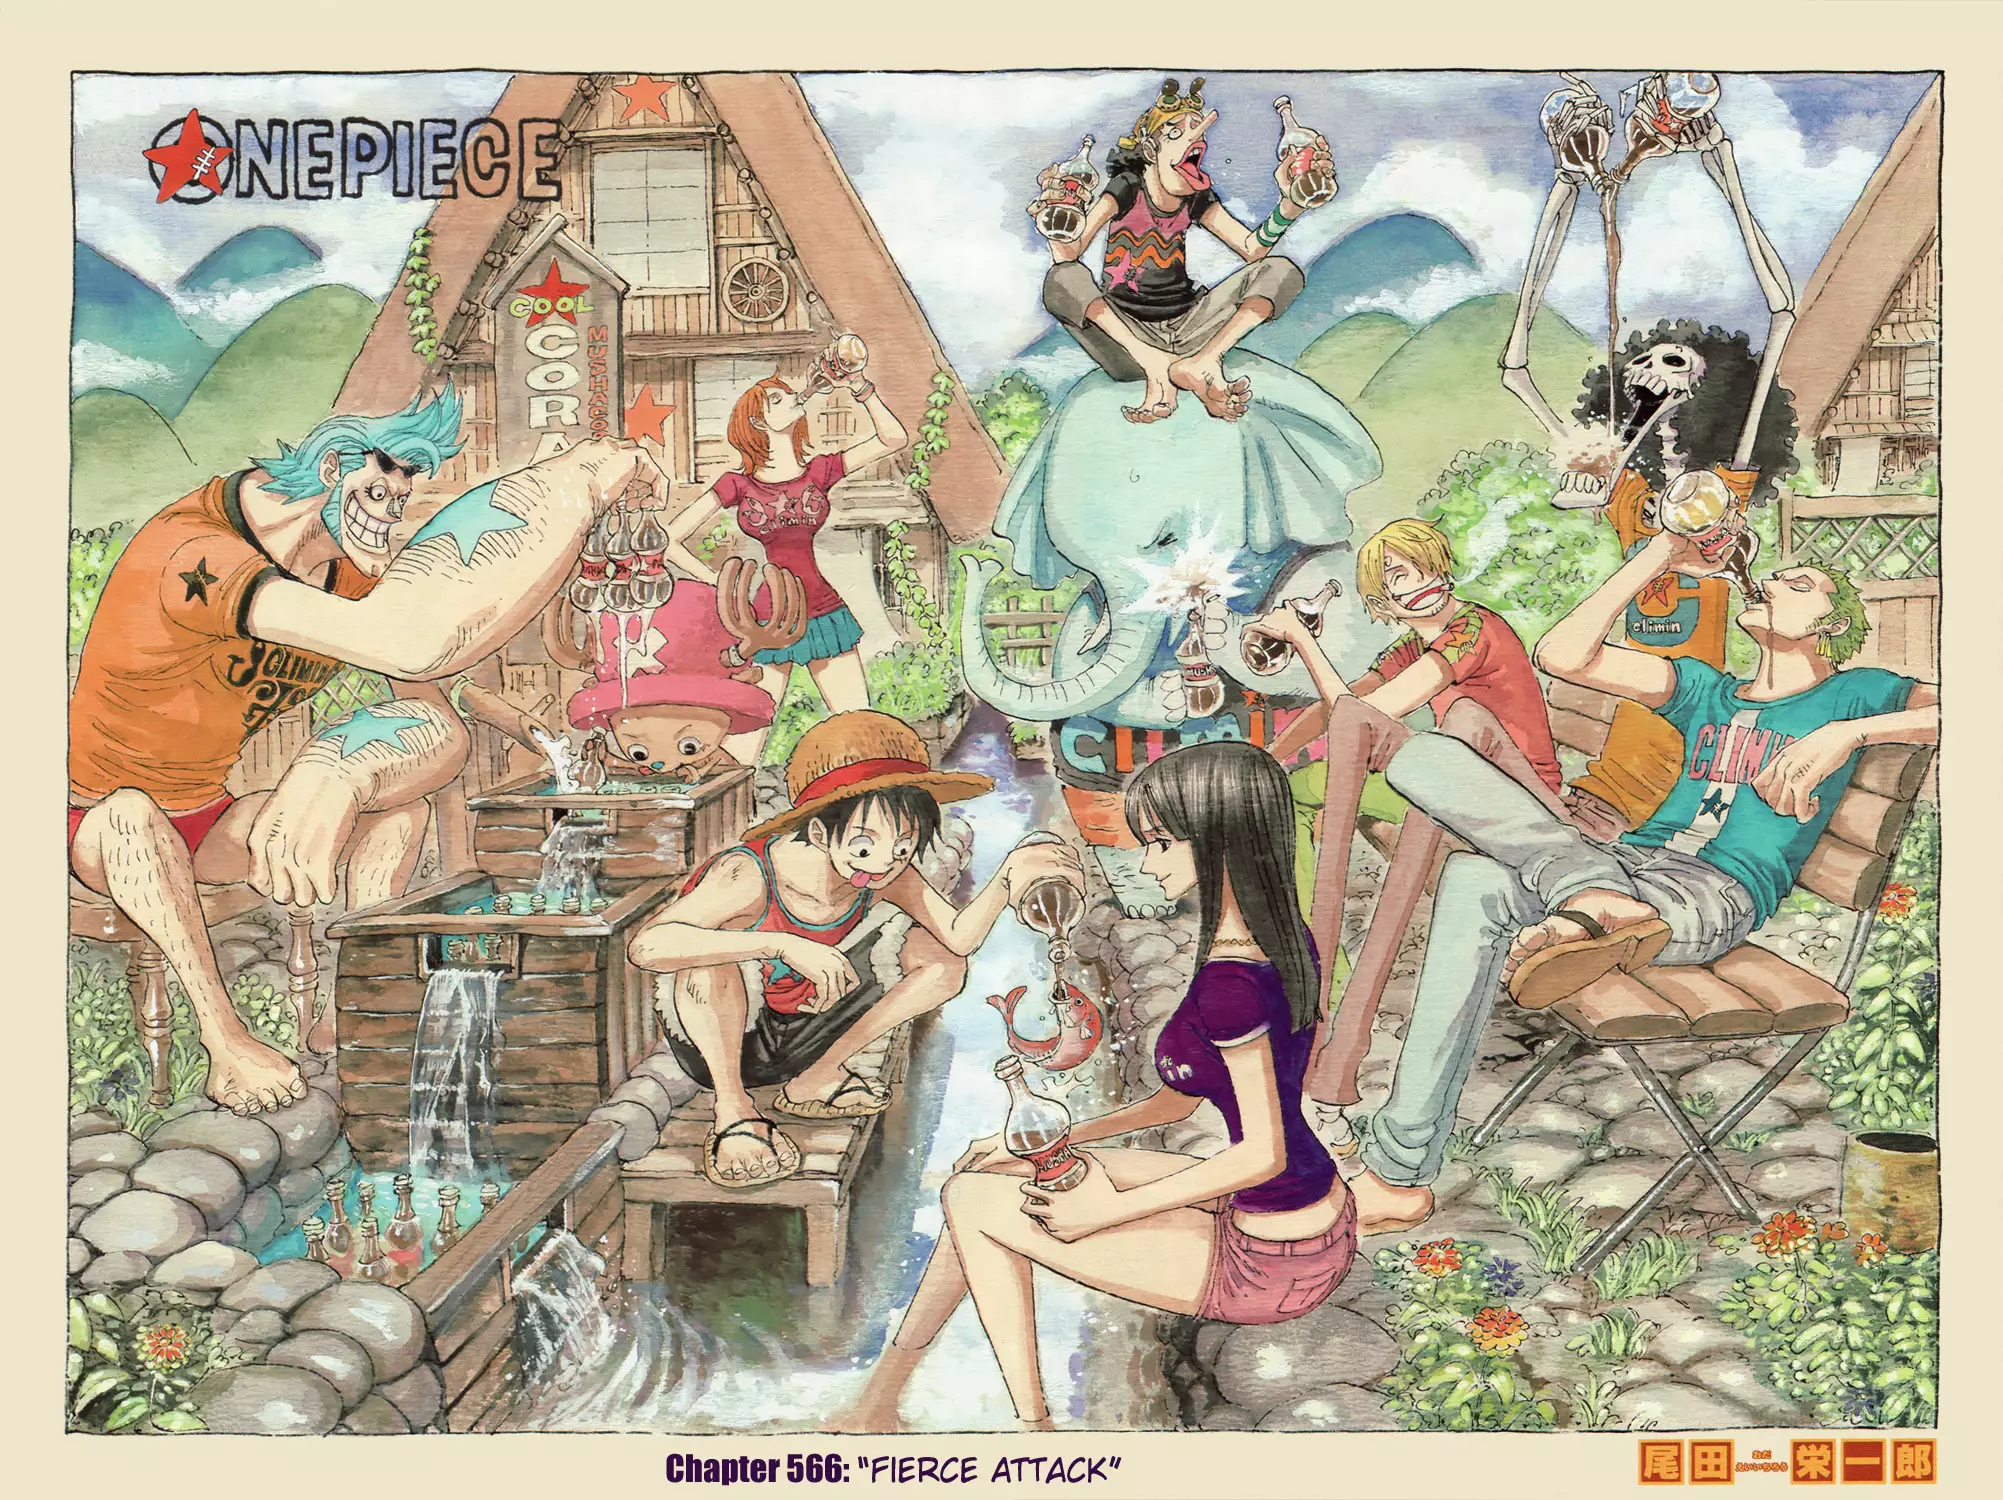 One Piece - Digital Colored Comics - 566 page 1-690cfed8